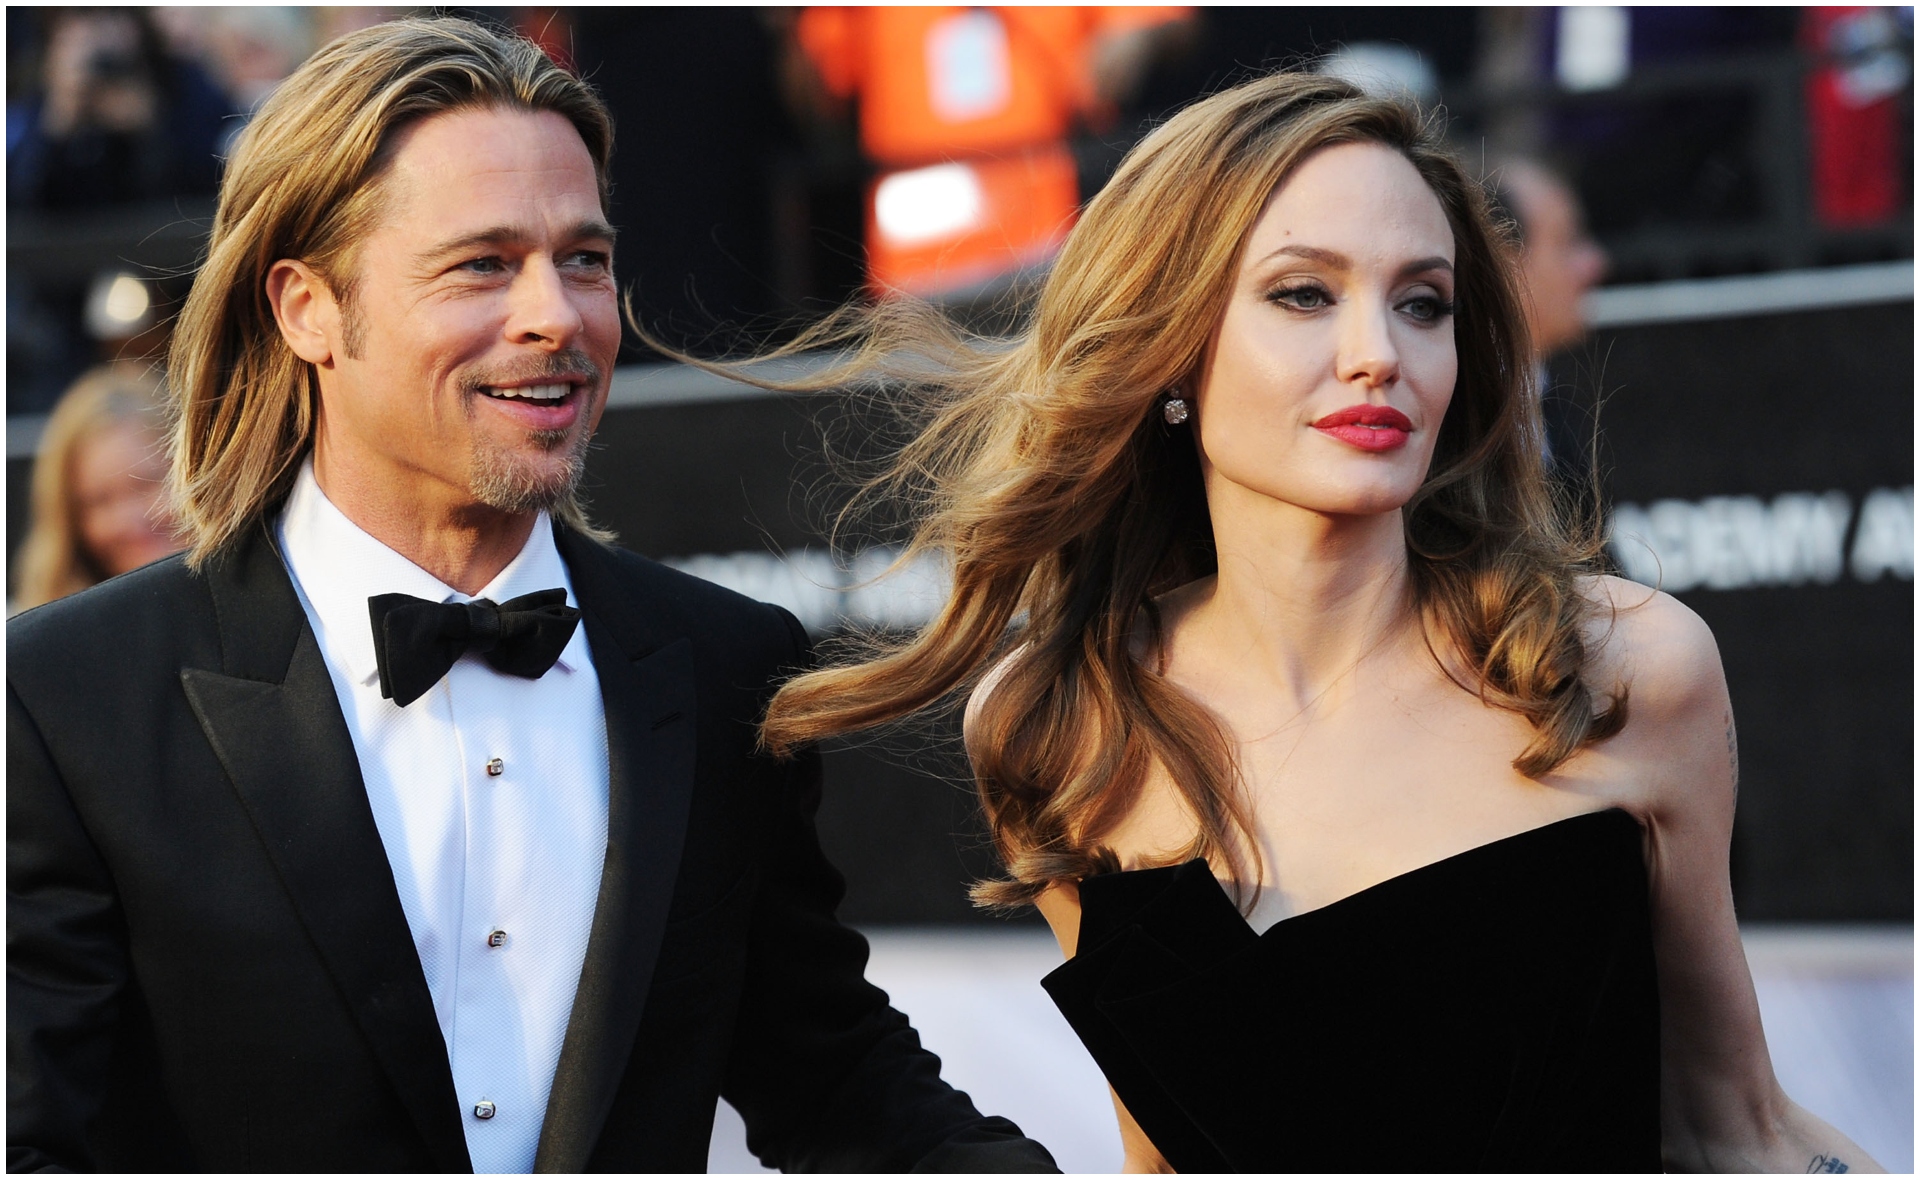 Is Angelina Jolie trying to turn her kids against Brad Pitt?